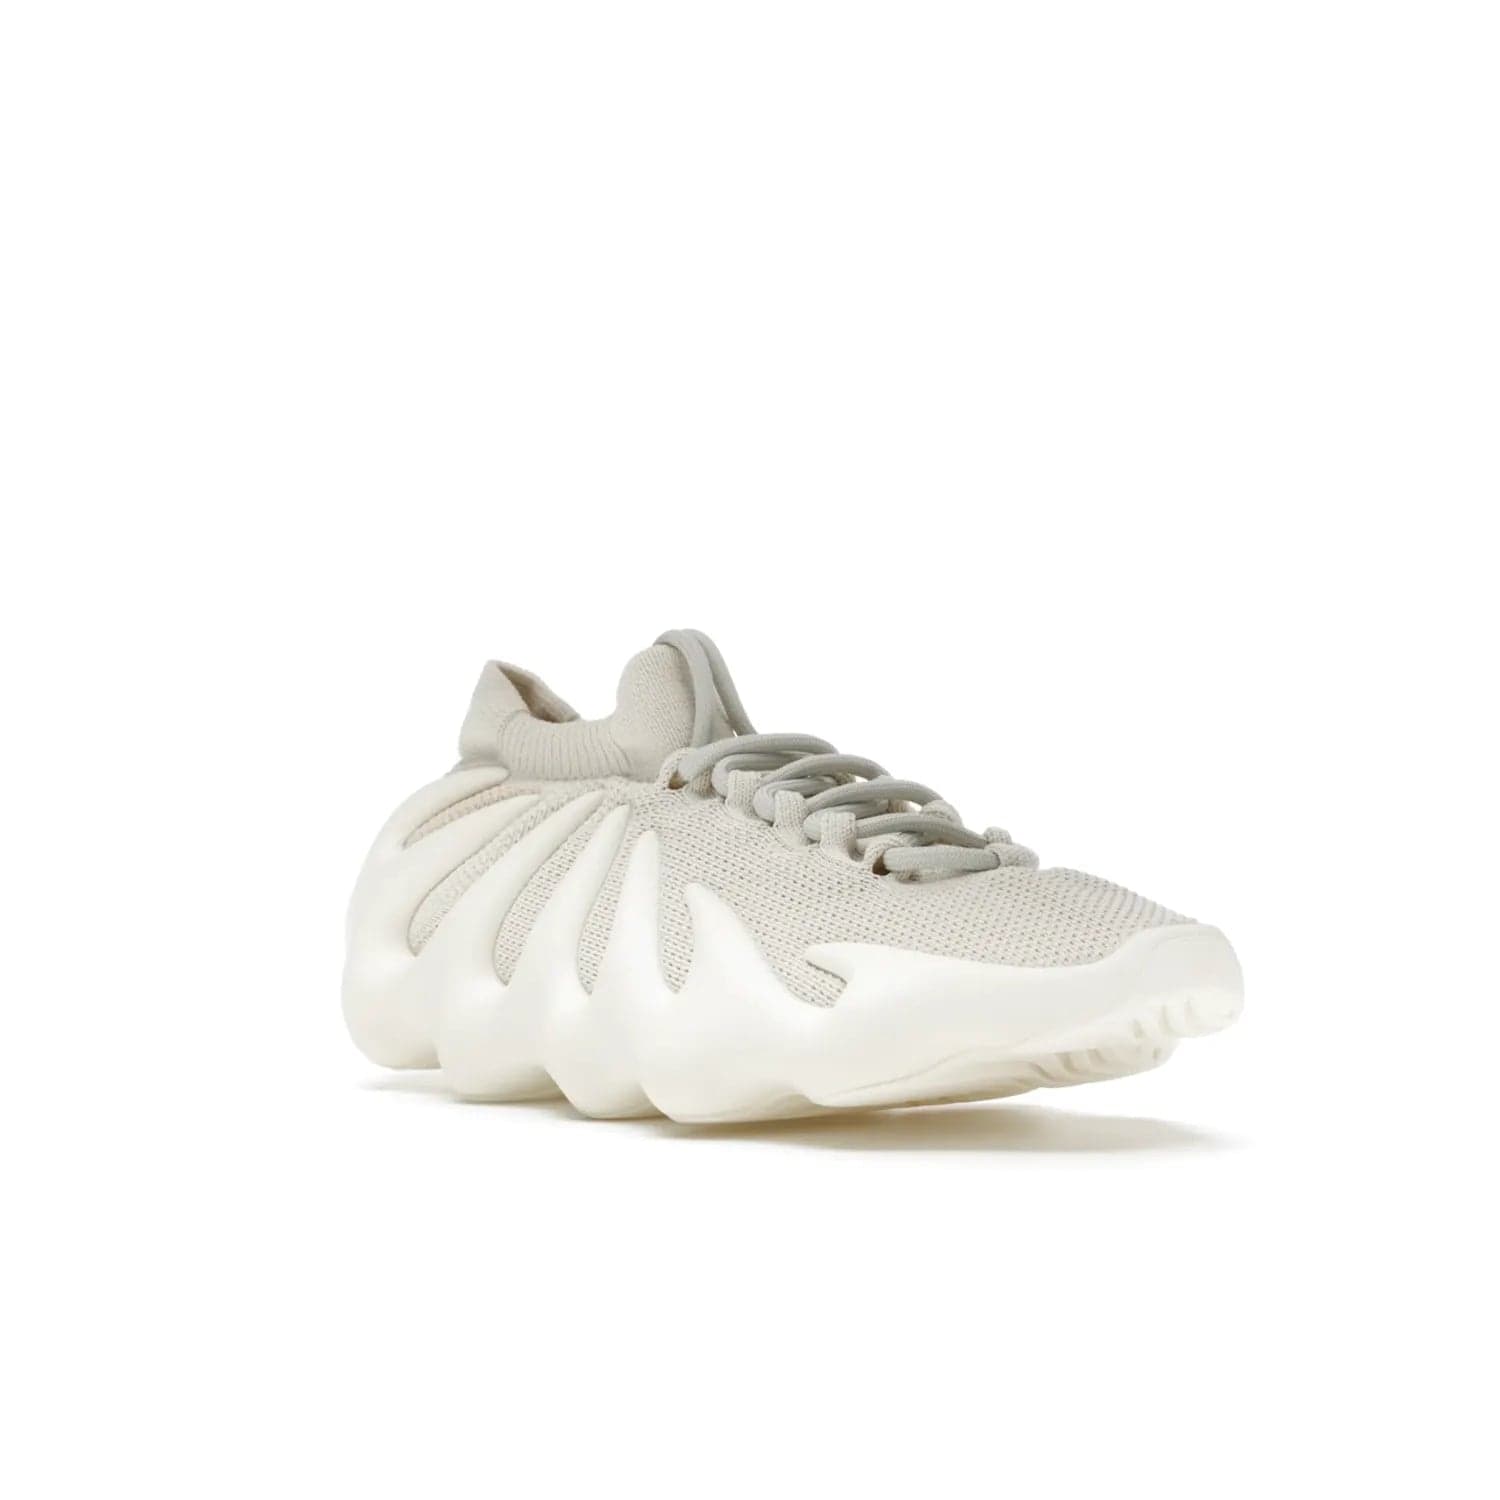 adidas Yeezy 450 Cloud White - Image 6 - Only at www.BallersClubKickz.com - Experience the future with the adidas Yeezy 450 Cloud White. A two-piece design featuring an extreme foam sole and mesh upper, this silhouette is expected to release in March 2021. Get your hands on this striking Cloud White/Cloud White colorway and stand out in the crowd.